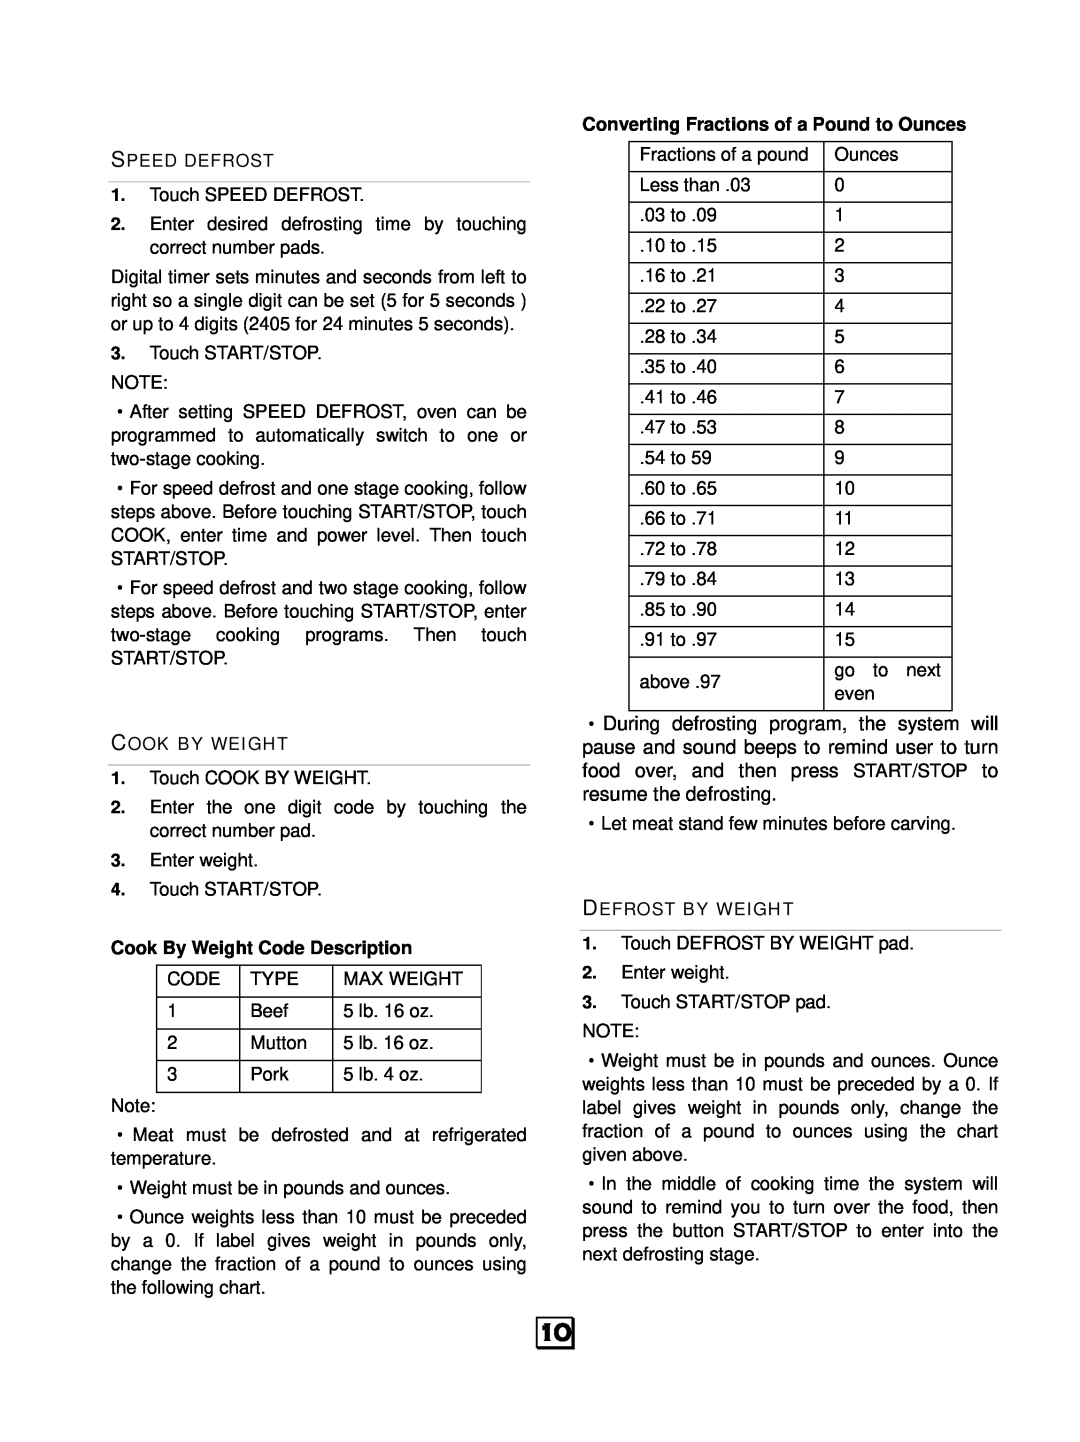 RCA RMW1143 owner manual Cook By Weight Code Description, Converting Fractions of a Pound to Ounces 